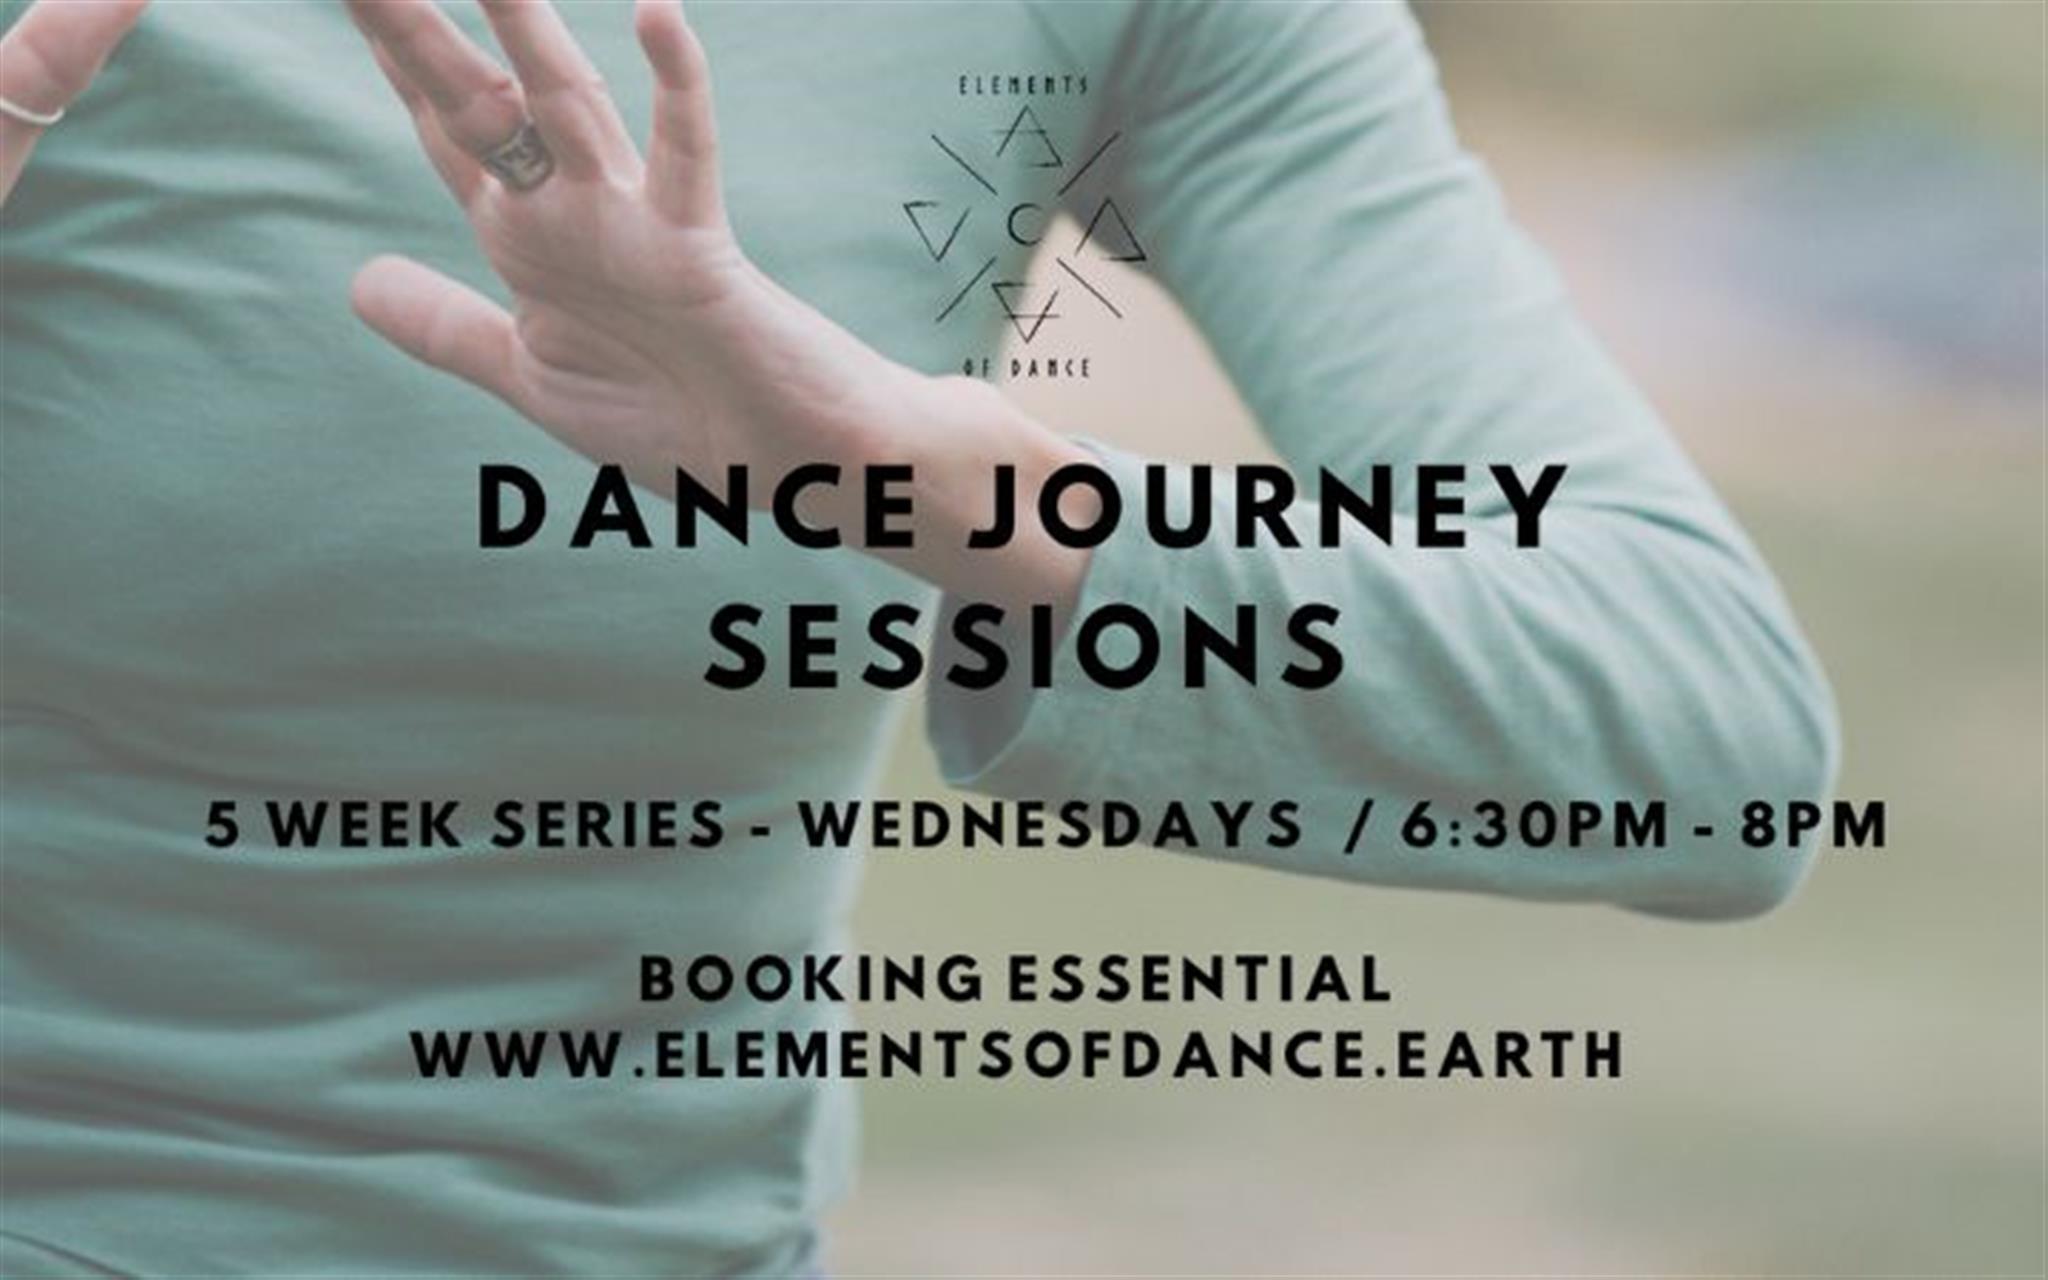 Weekly Wednesday Dance Journey Sessions